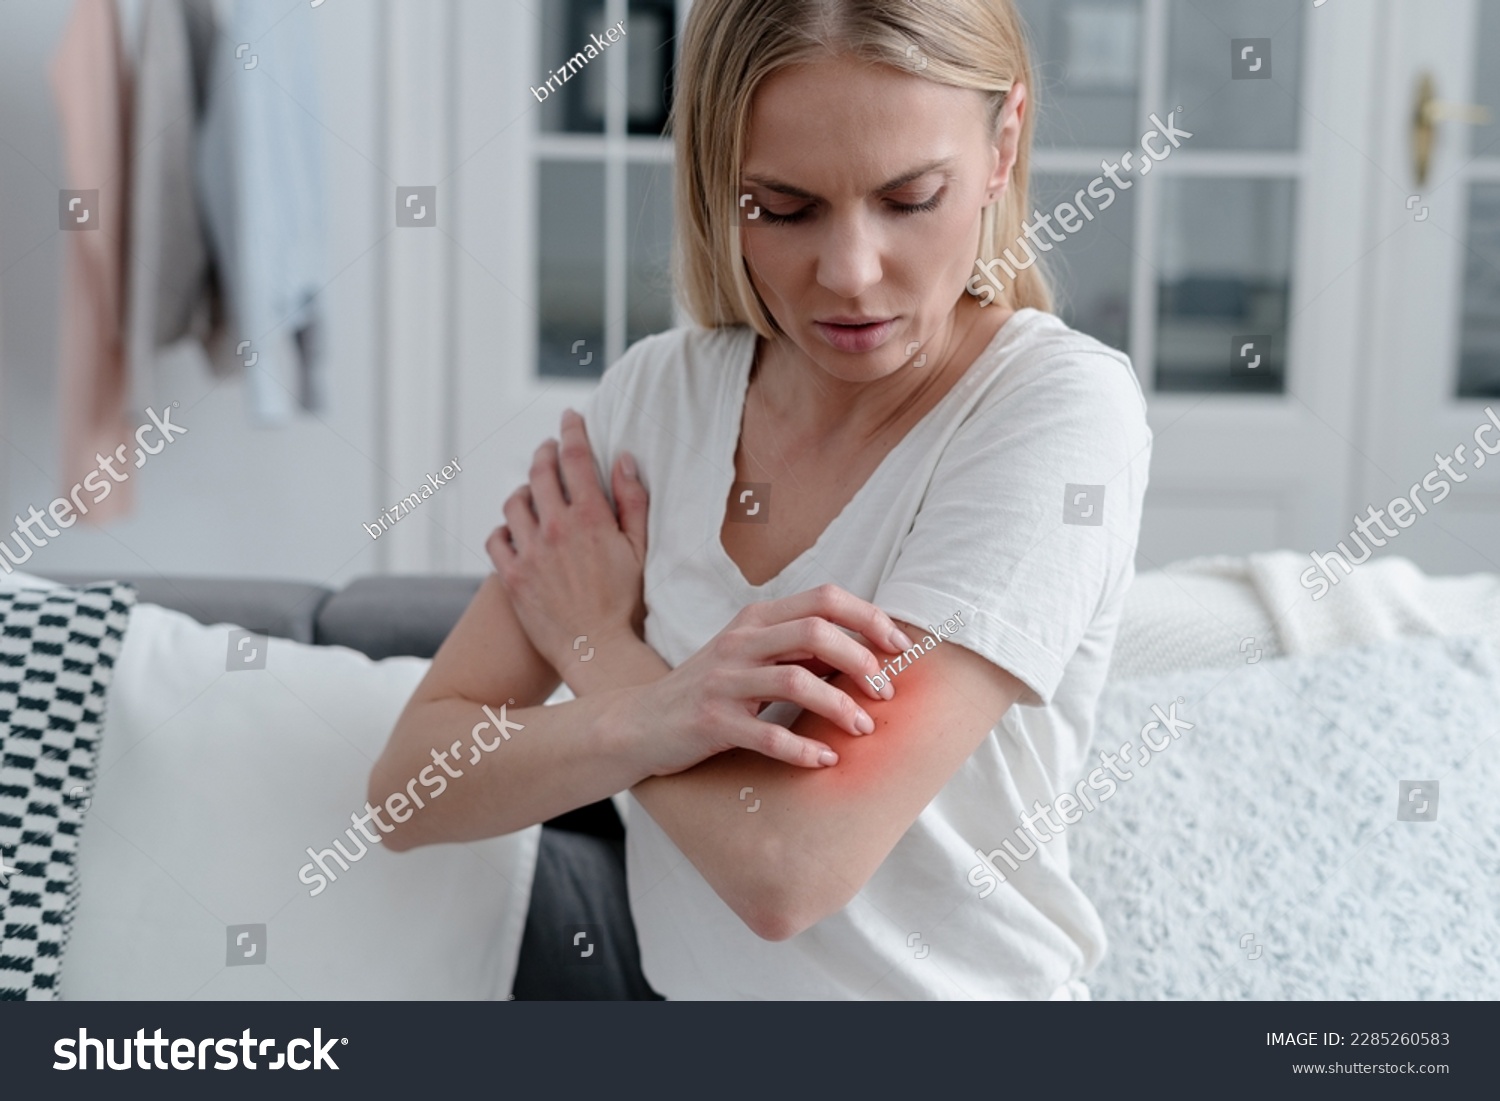 worried female feeling unwell, has allergy or reaction from insect bite, girl with itch or irritation on arm sitting on sofa in room  #2285260583